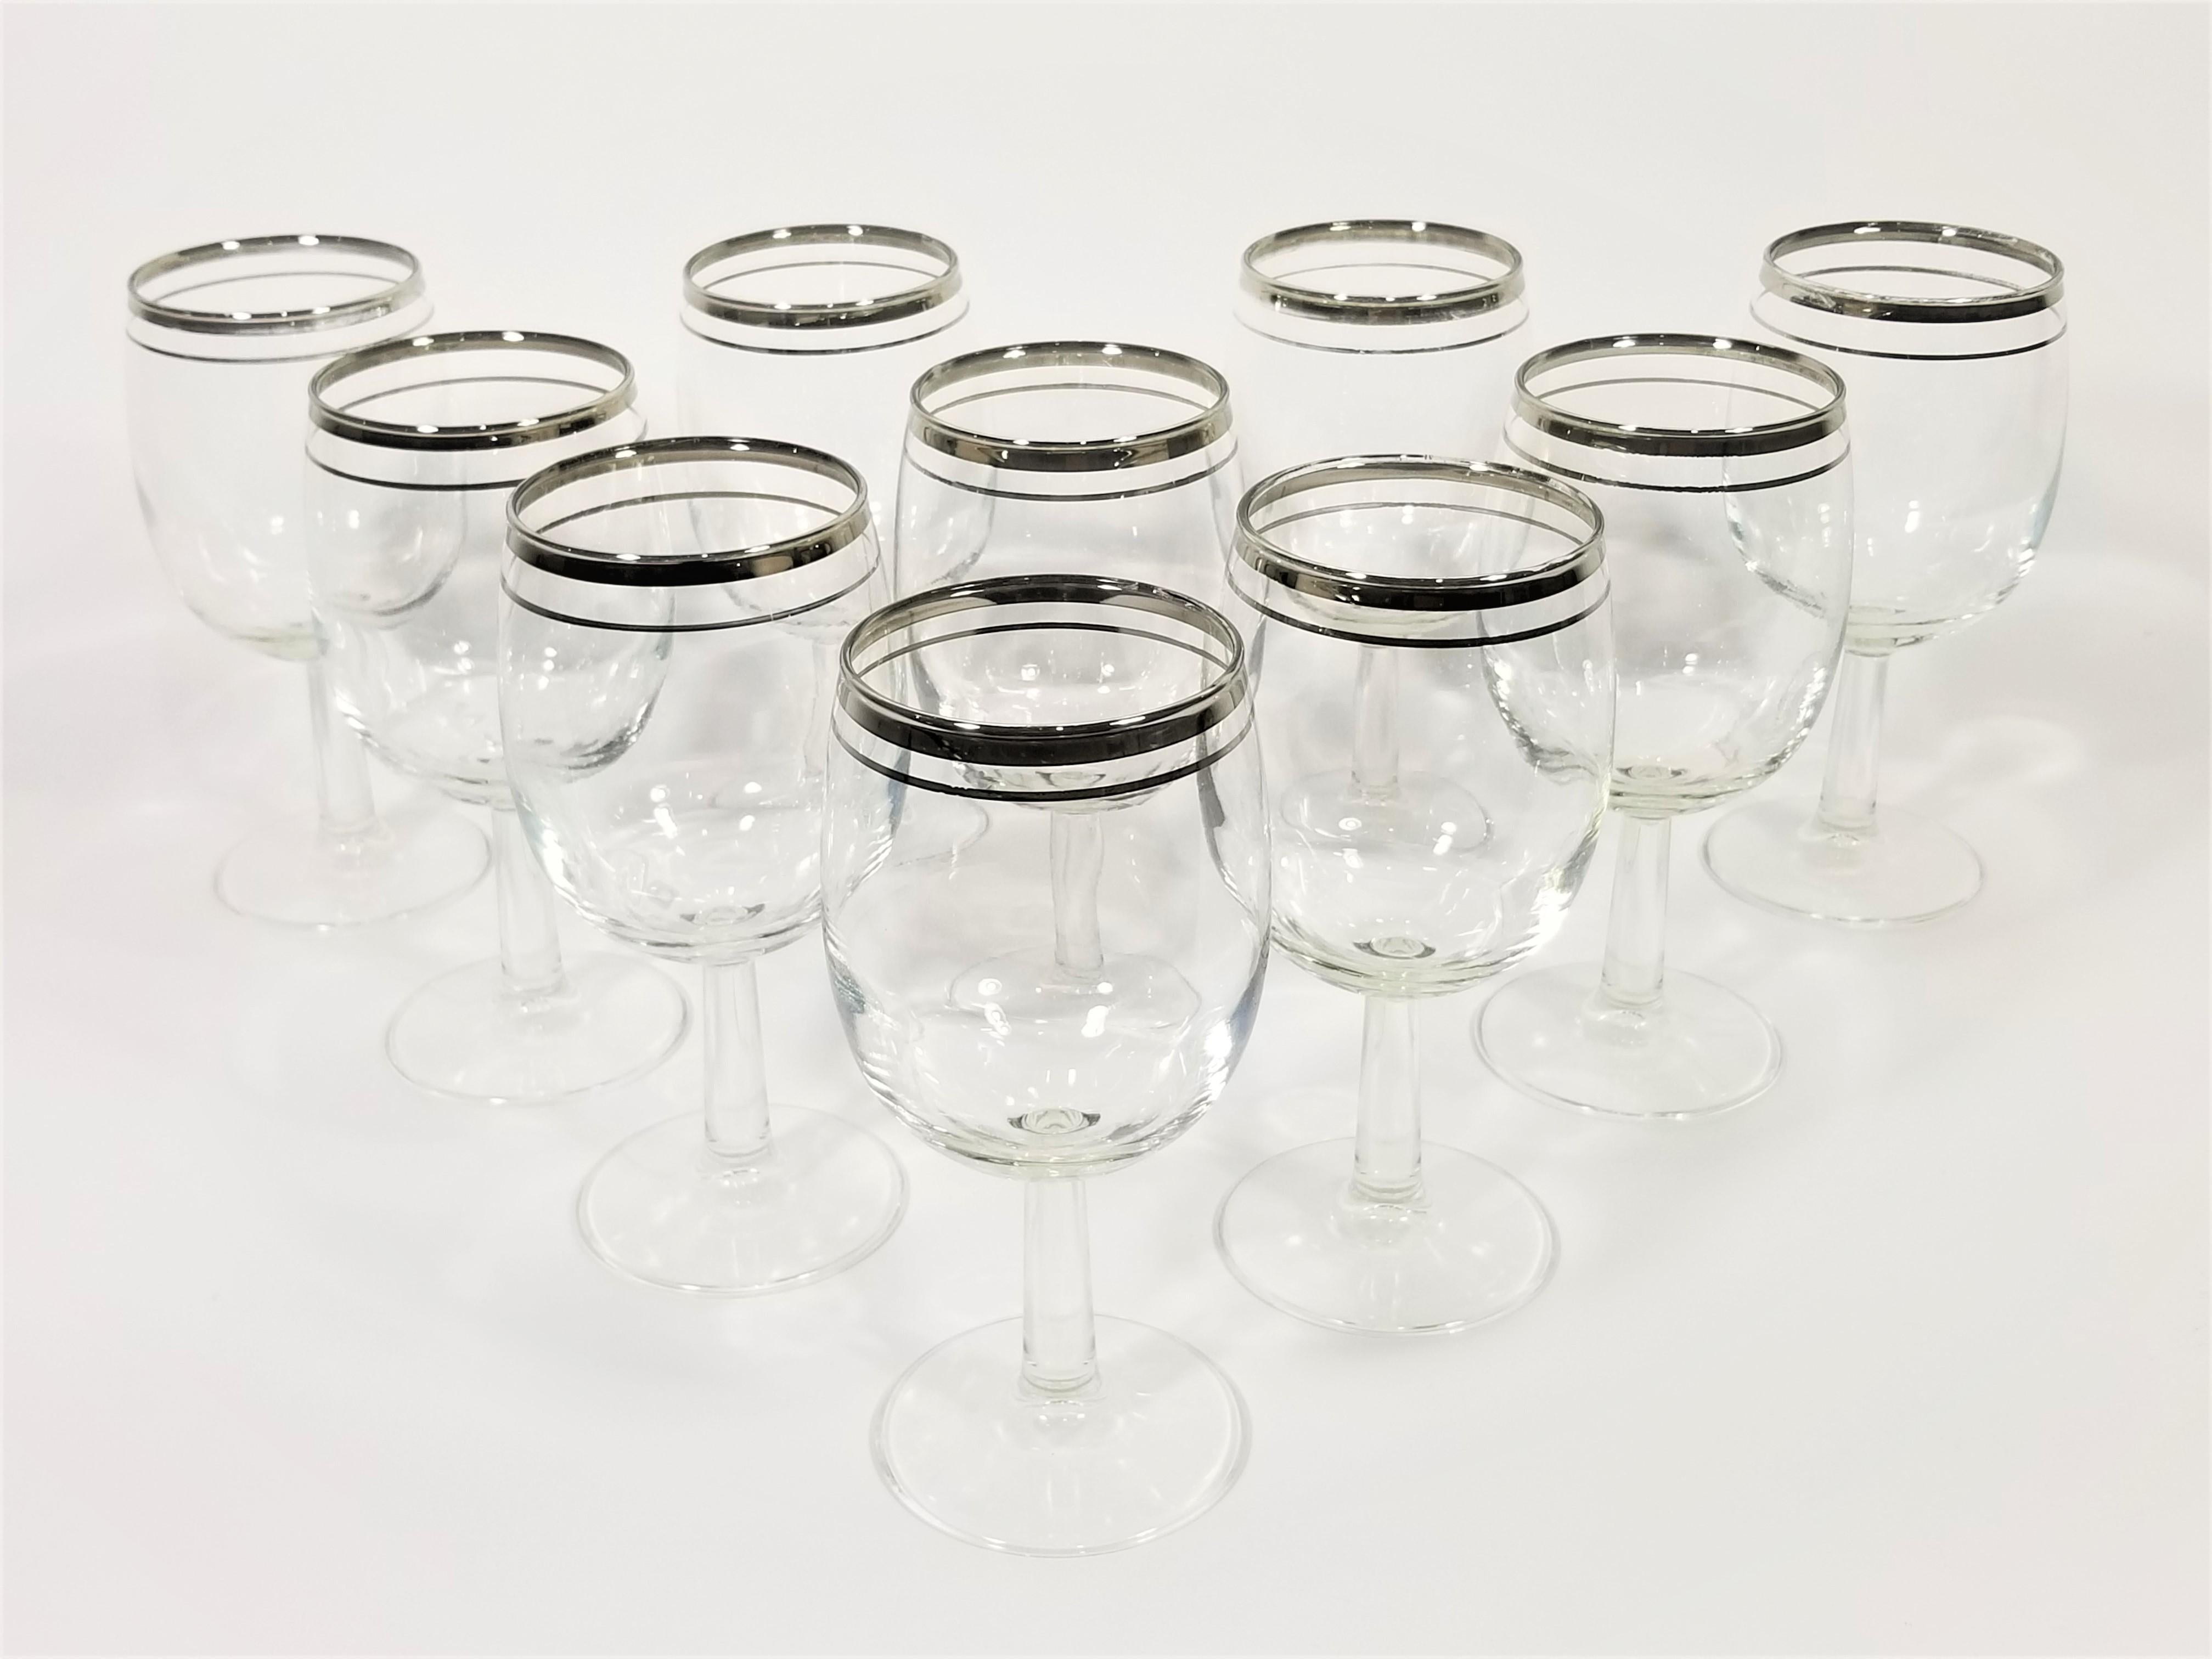 silver rimmed drinking glasses